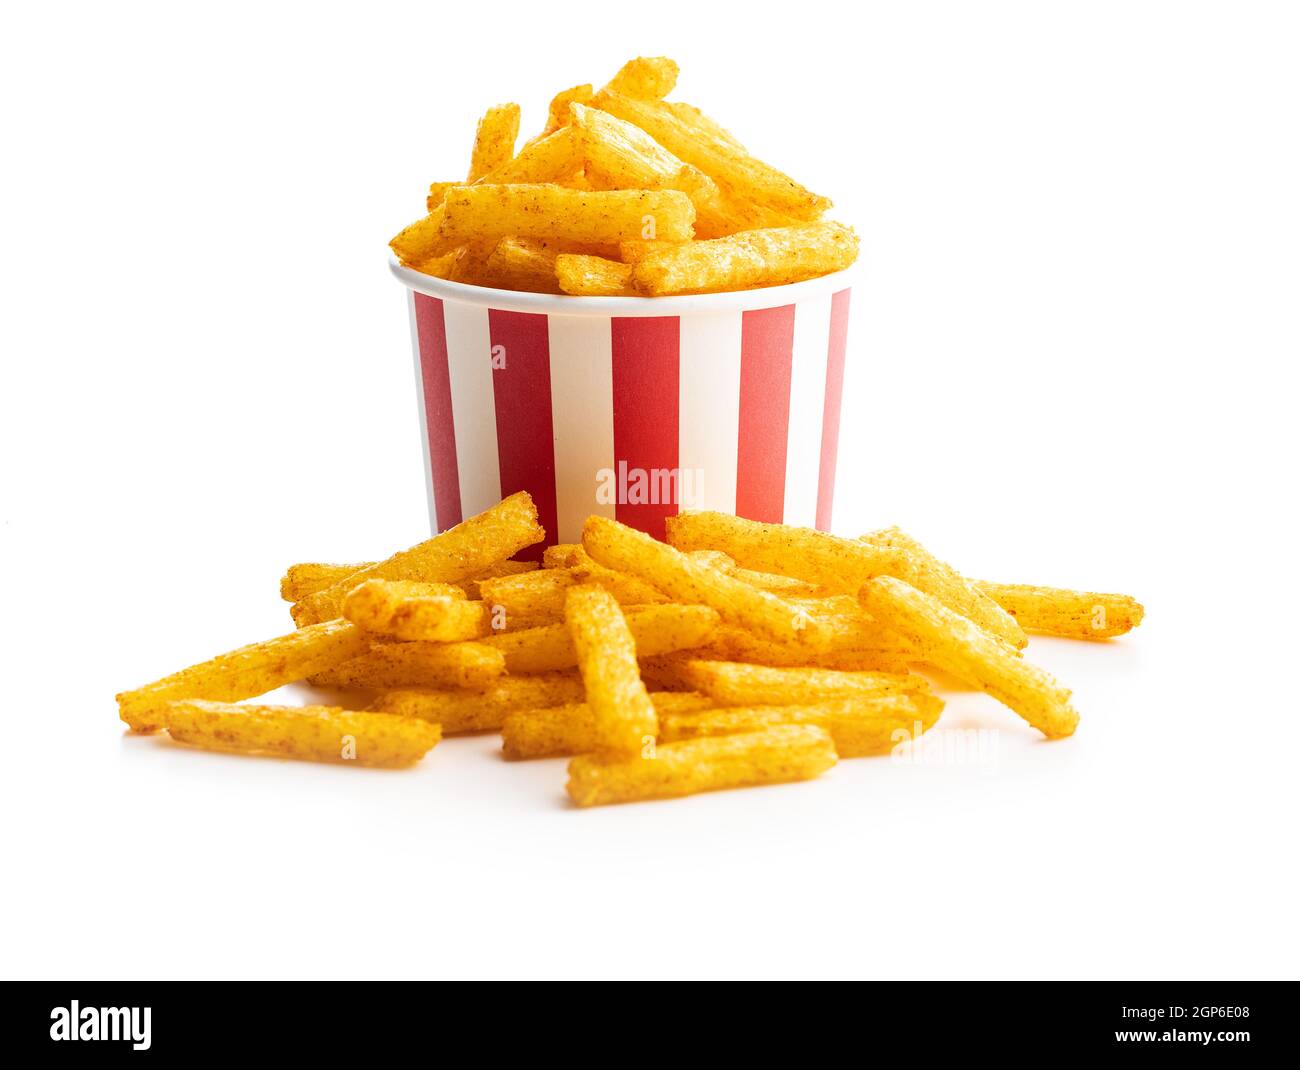 French fries. Salted snack. Potato chips in paper cup isolated on white background. Stock Photo